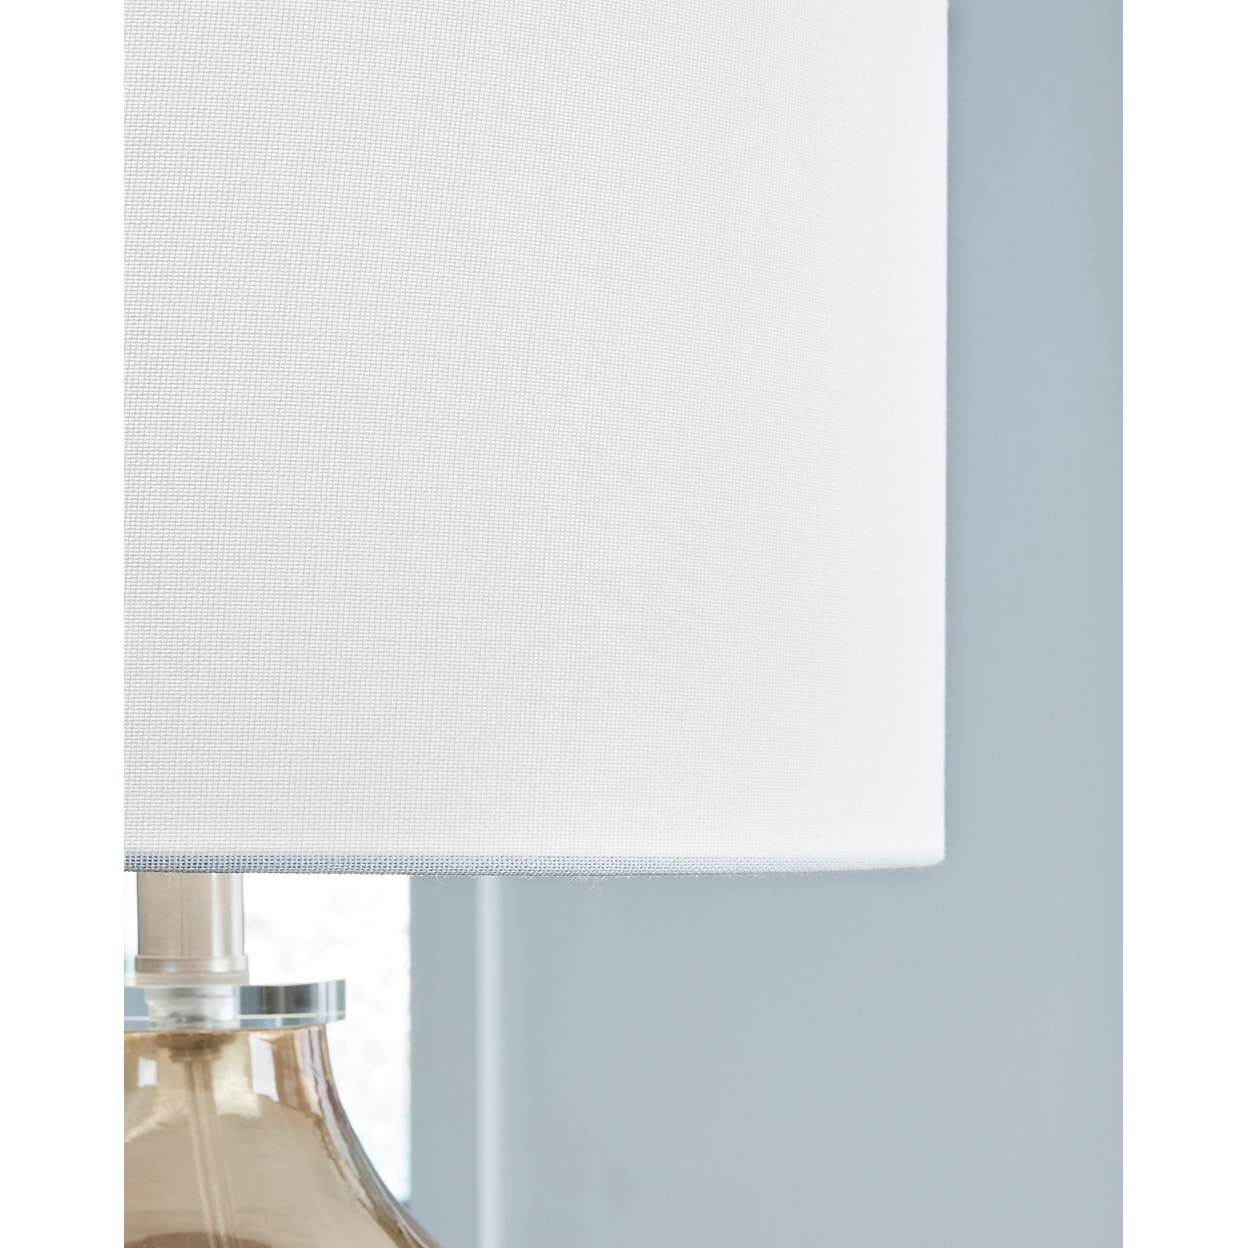 Signature Design by Ashley Lamps - Contemporary Lemmitt Table Lamp